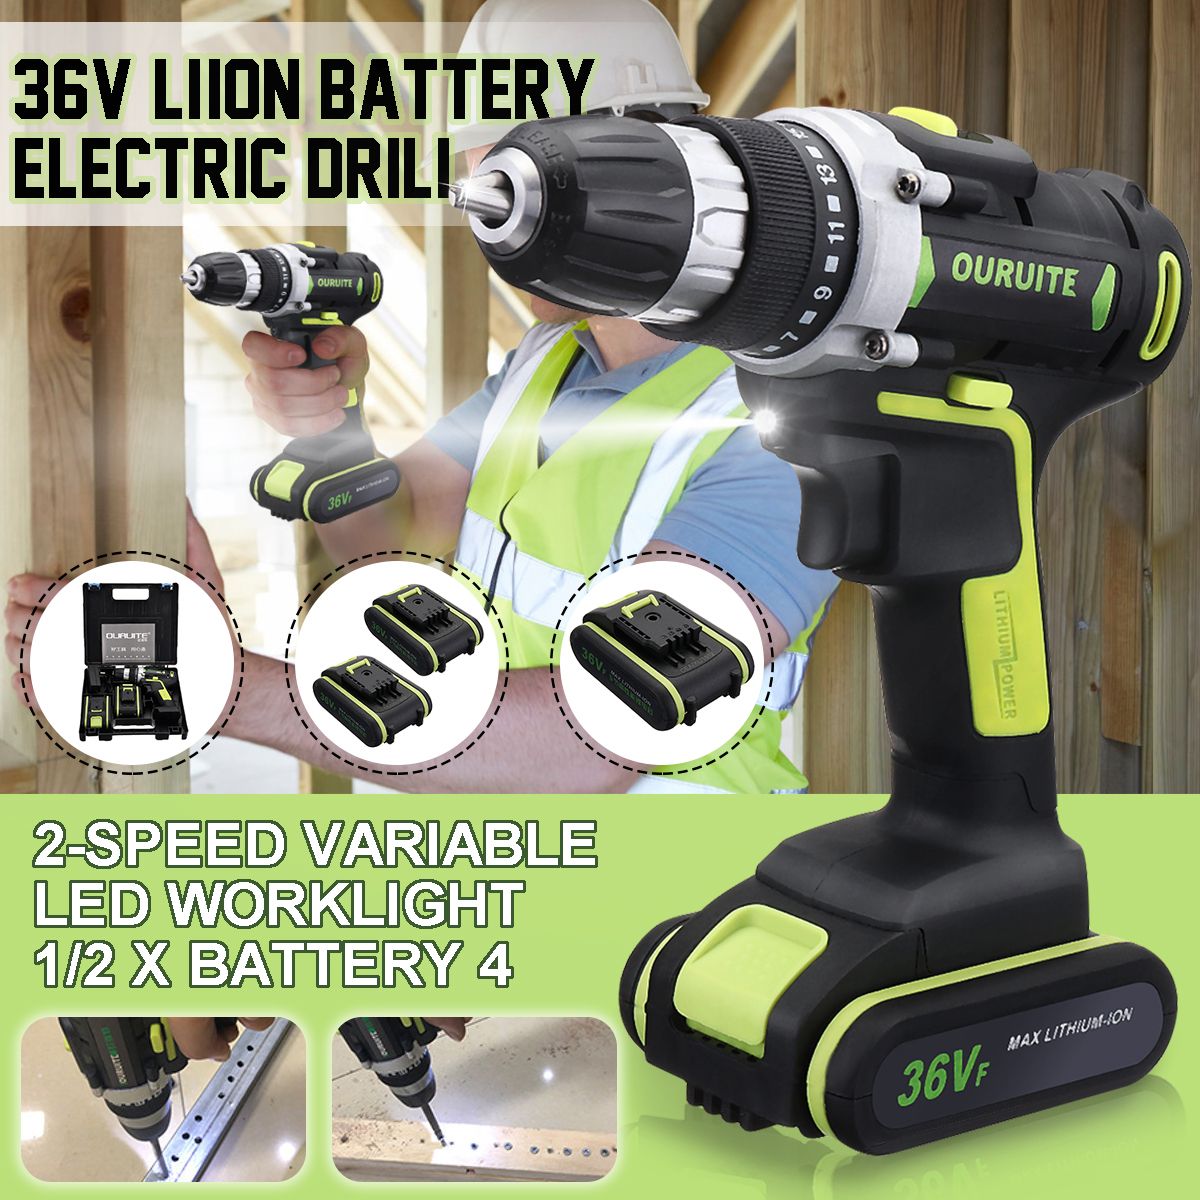 36V-Electric-Cordless-Drill-LED-Lighting-Double-Speed-Li-Ion-Battery-Power-Drills-Home-Repair-Tool-1412908